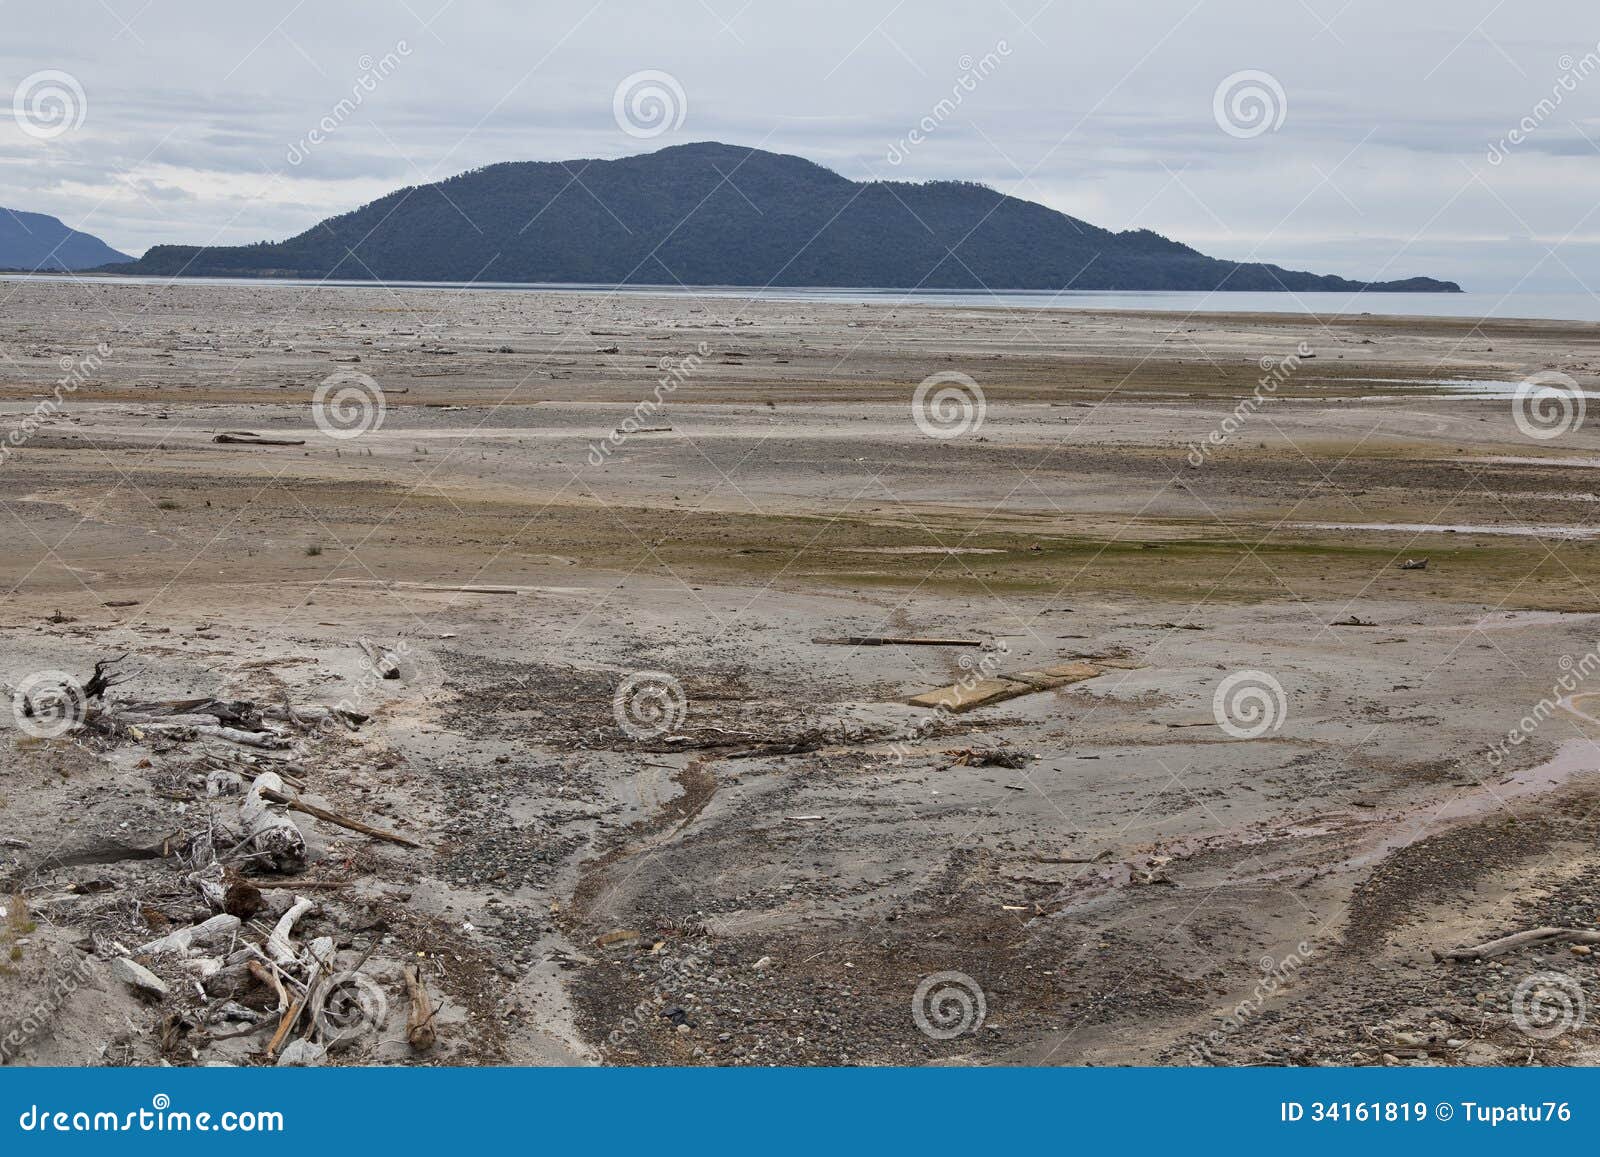 desolated landscape with ashes after volcano eruption in chaiten.